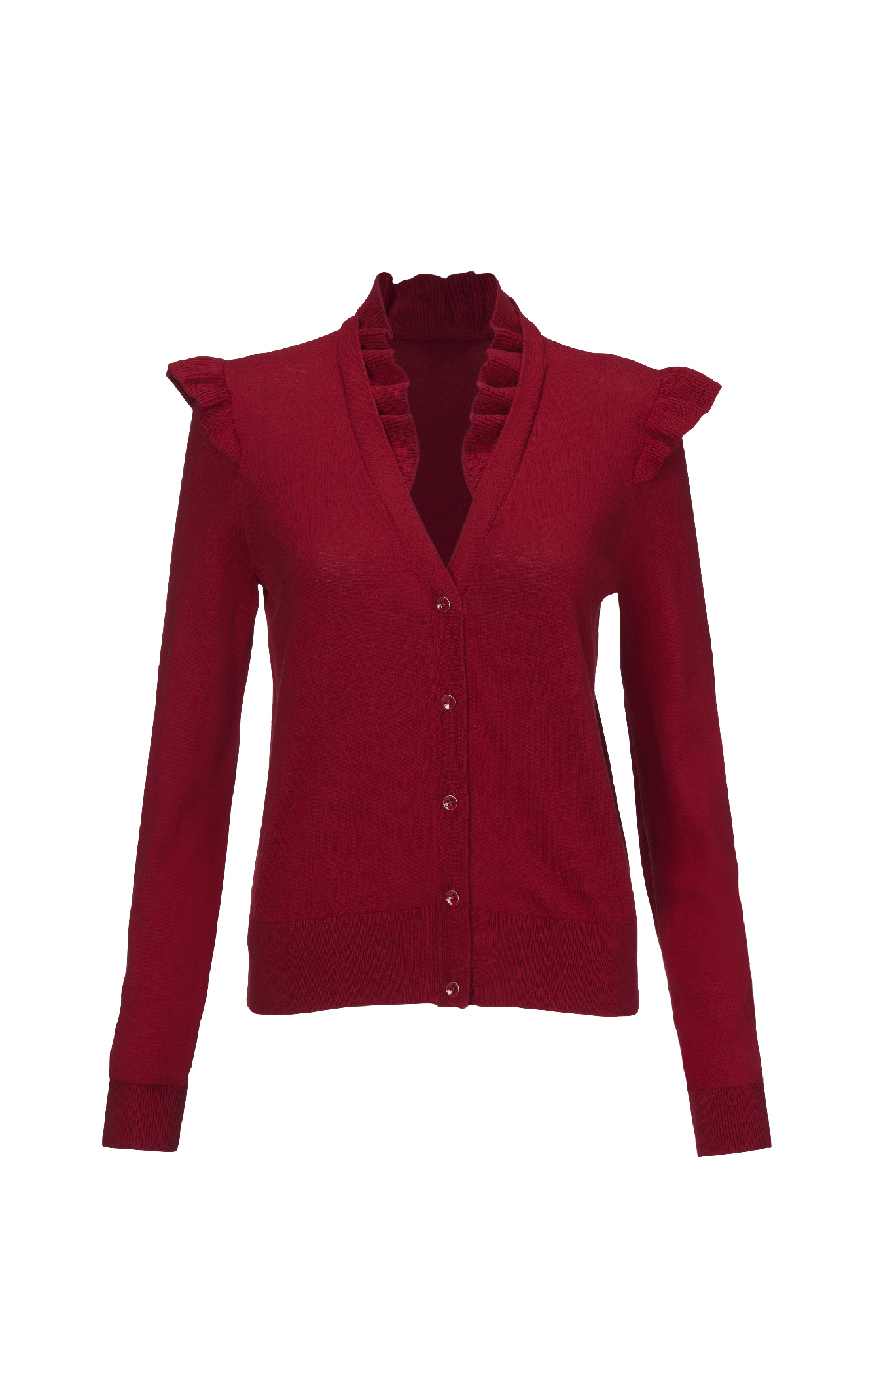 Sweaters - Cardigans, Pullovers For Women| cabi clothing